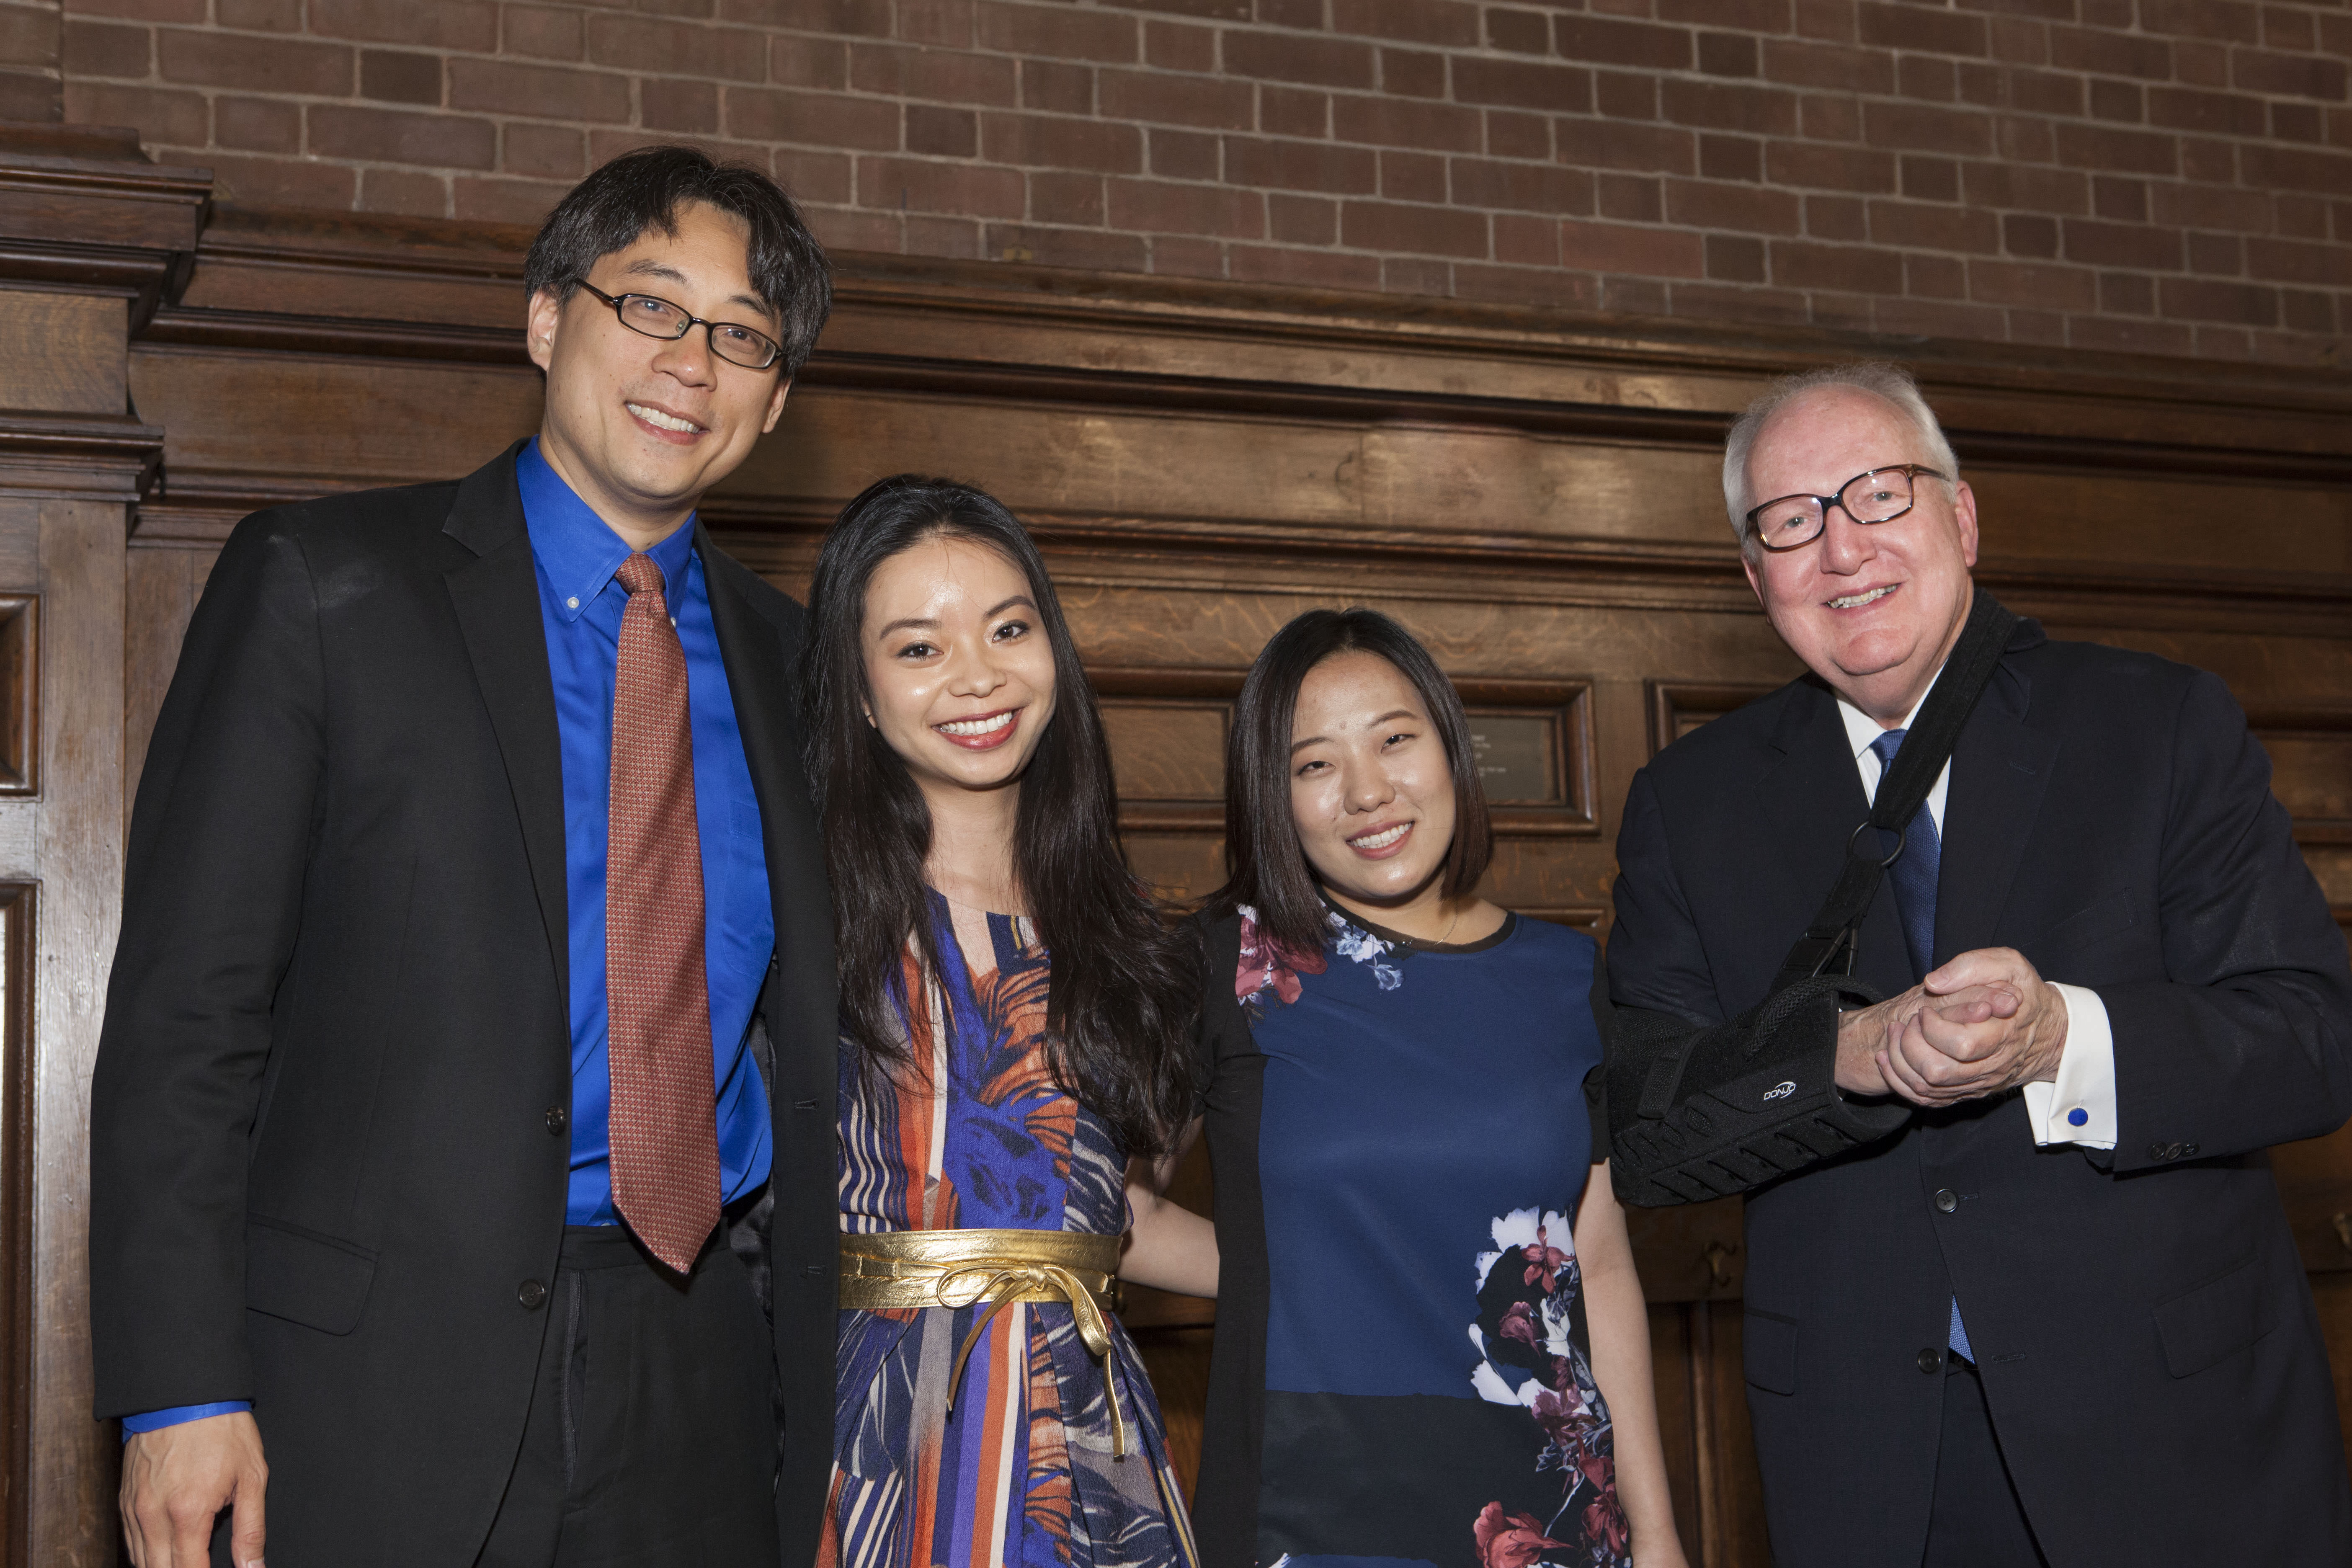 Students receive prizes at the Honors Dinner